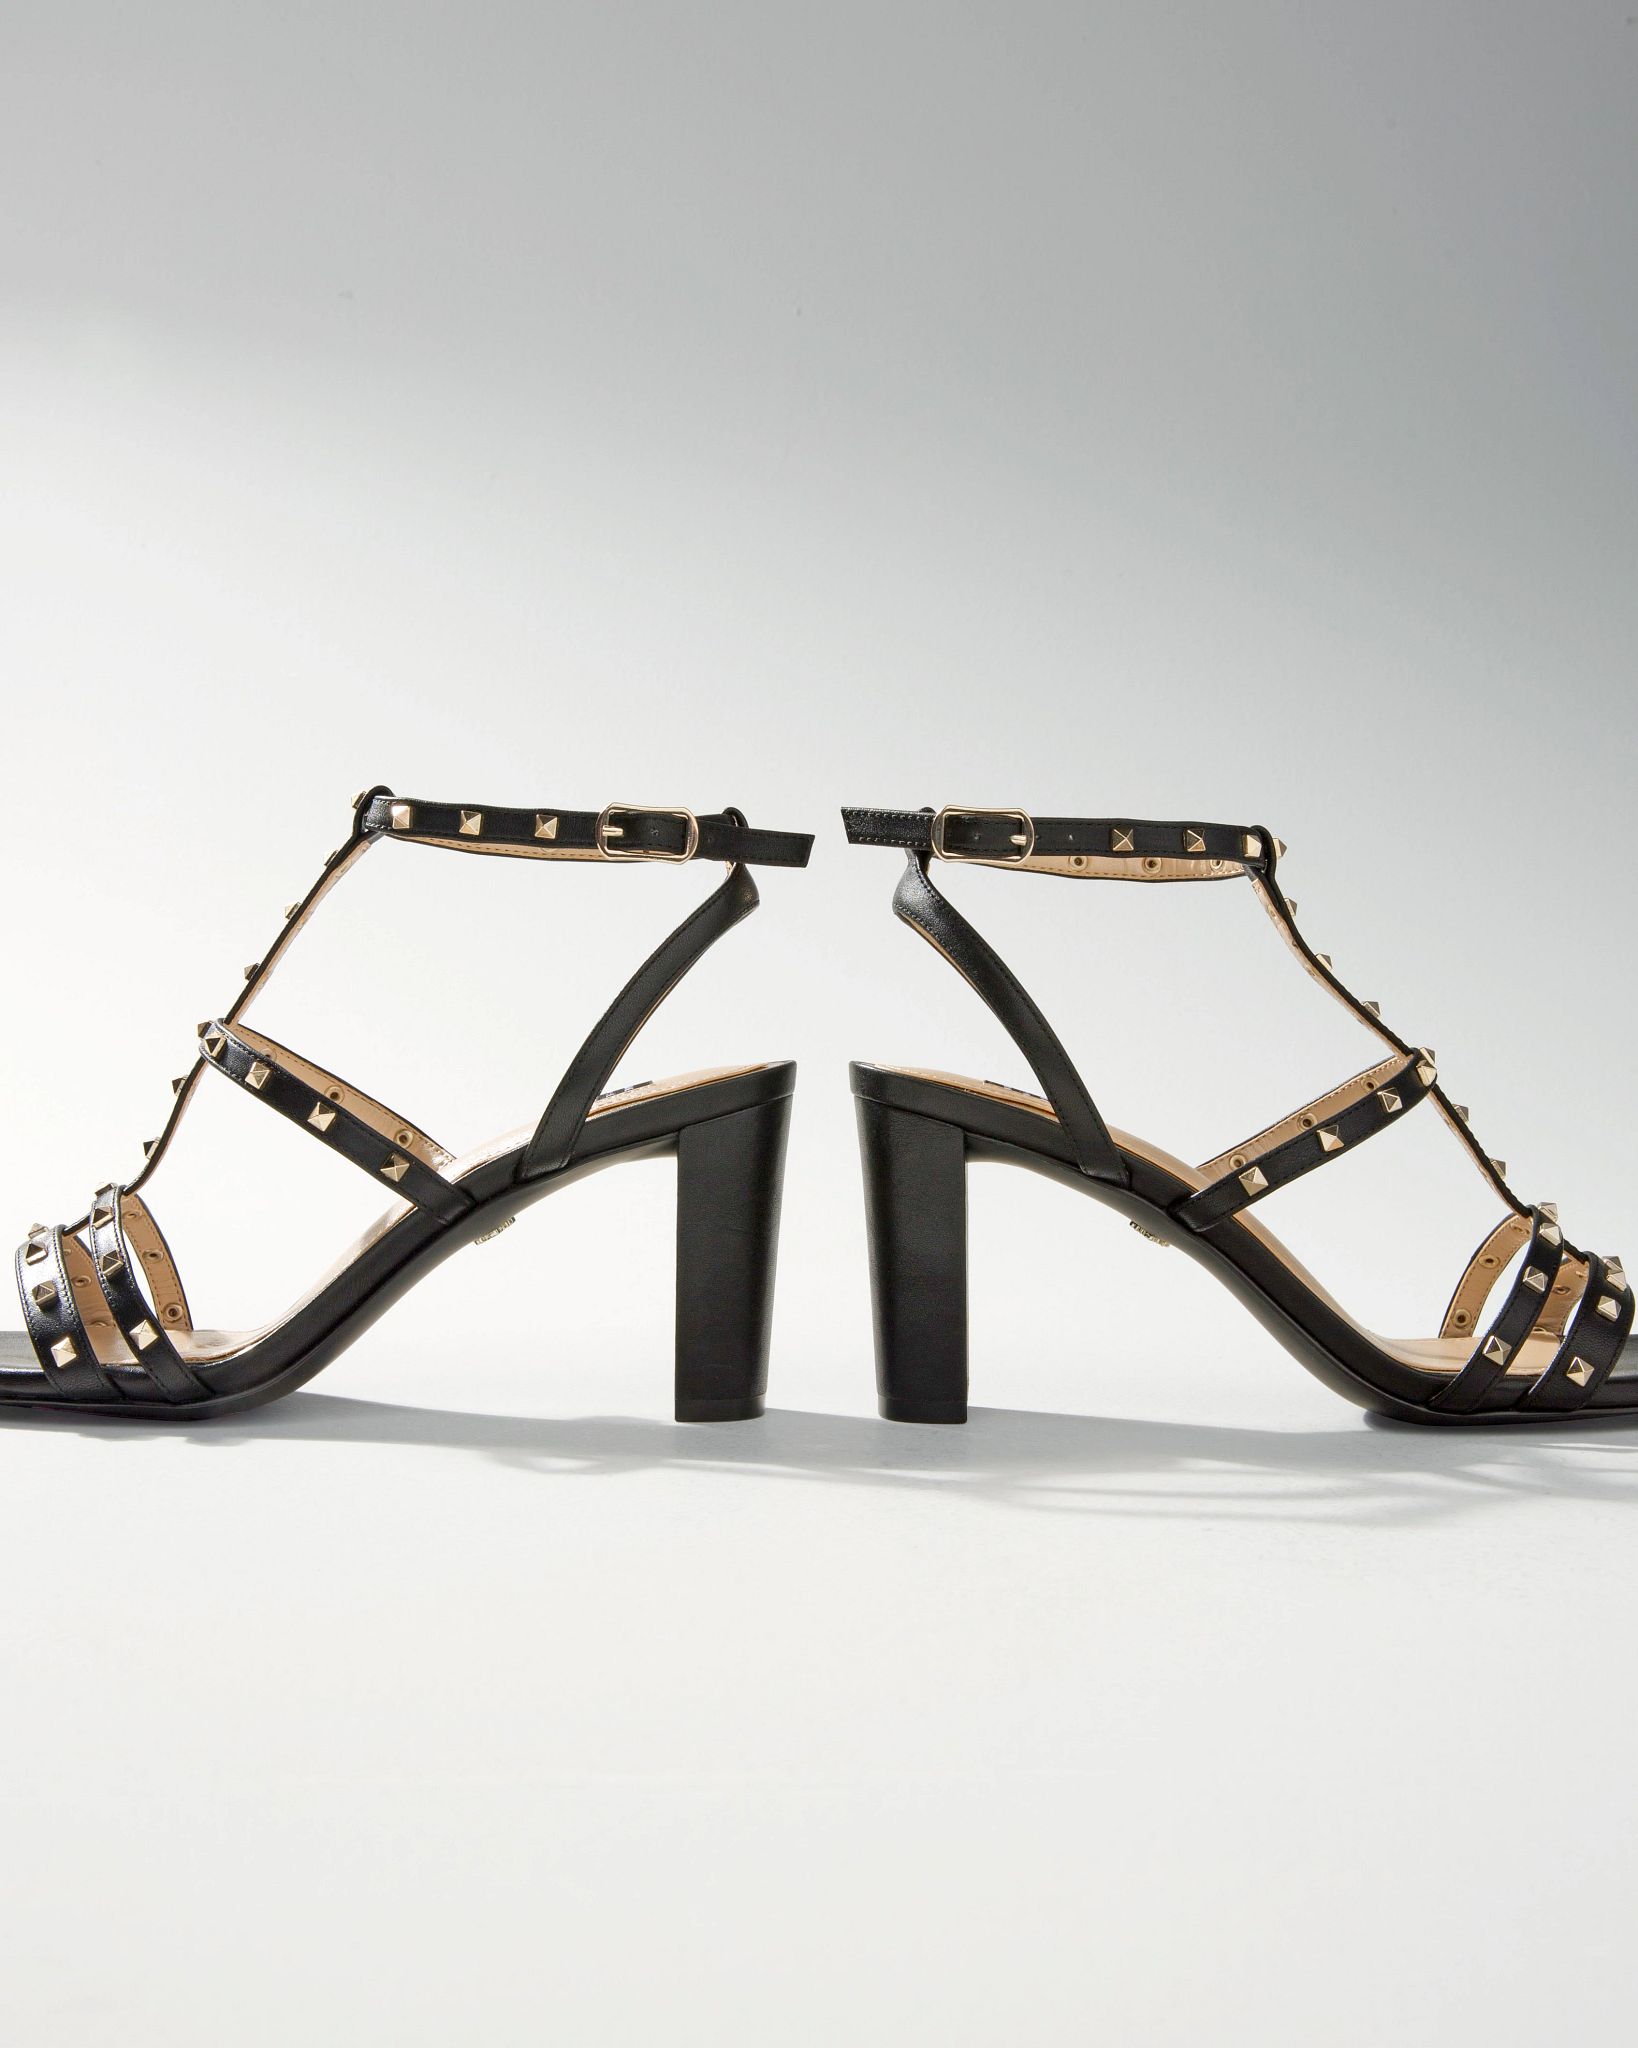 Strappy Studded Mid-Heel Sandal click to view larger image.